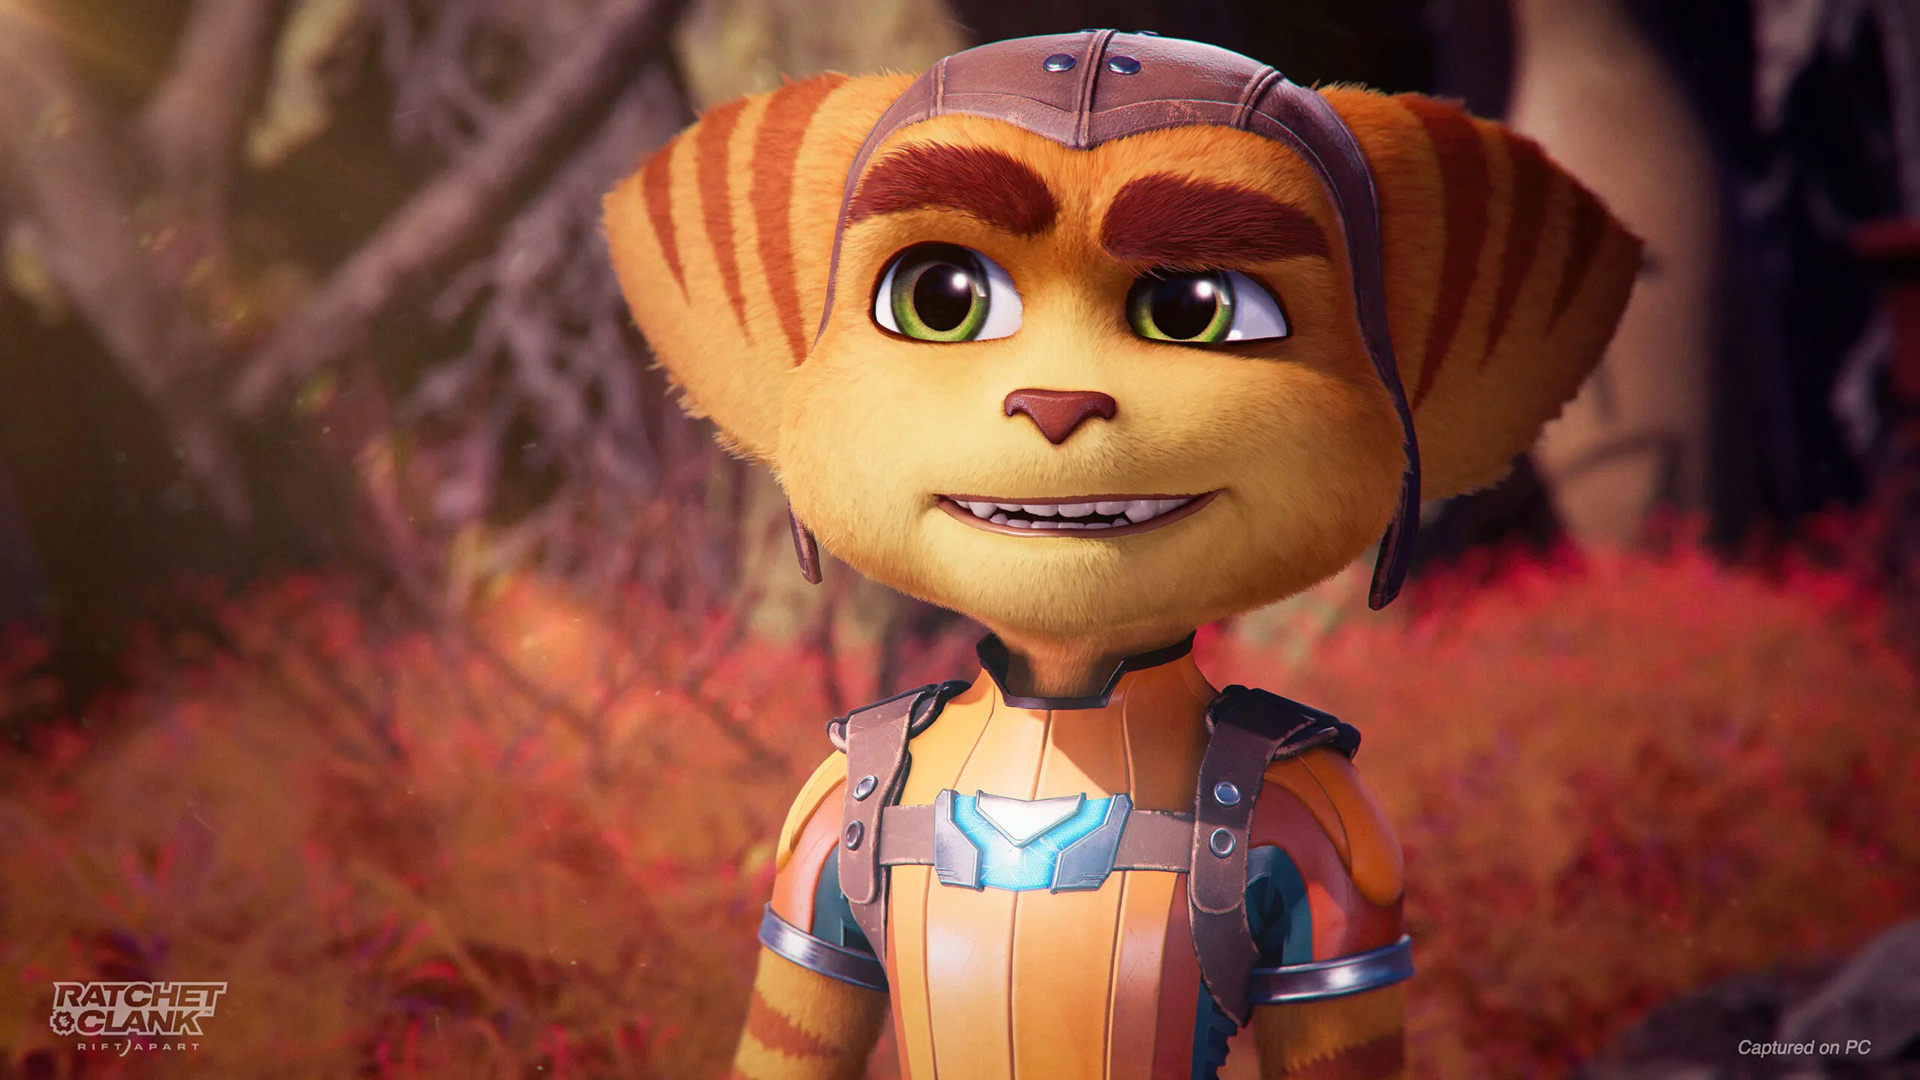 Ratchet & Clank: Rift Apart launches on PC July 26, 2023